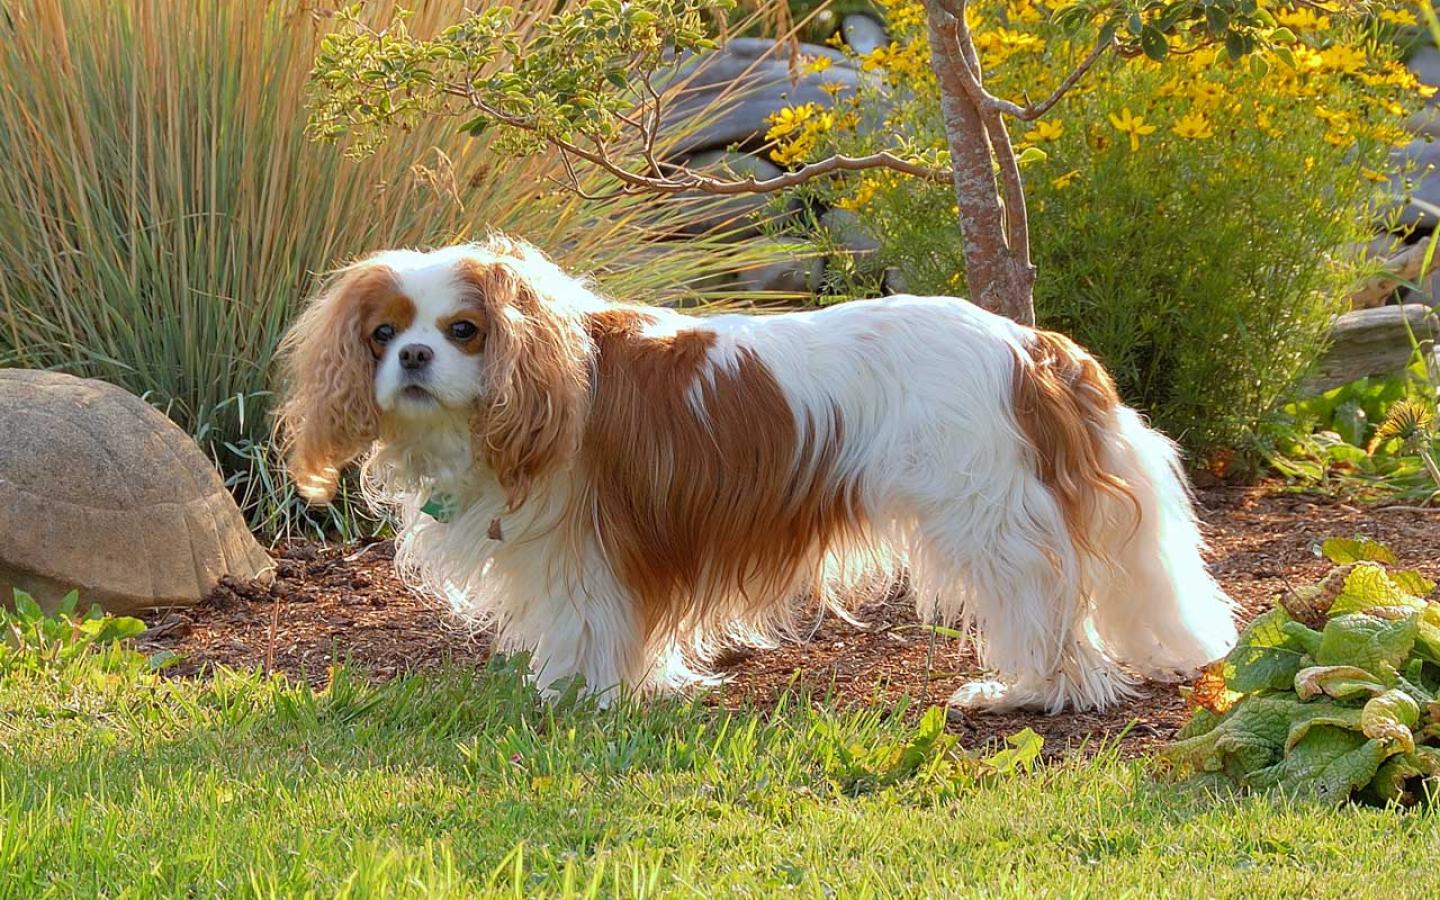 English Toy Spaniel - Cavalier King Charles in the Garden Wallpaper #3 1440 x 900 